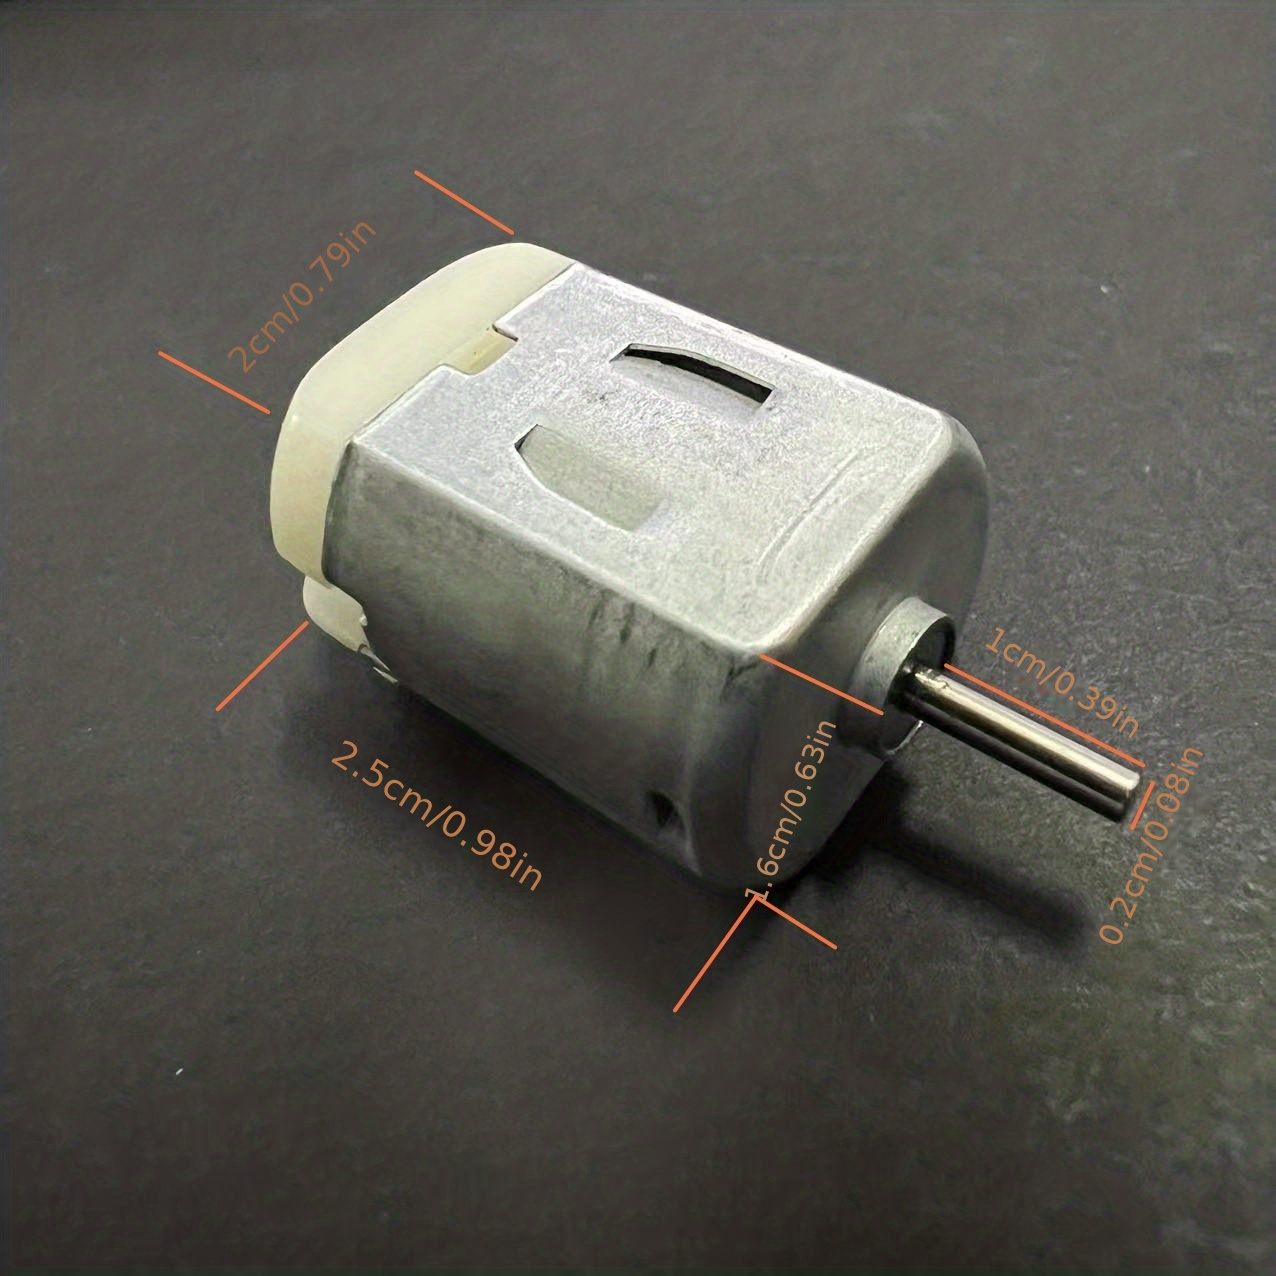 130 motor DC small motor motor diy with 2mm round plastic 9-tooth gear gear  - SINONING- Electronics DIY Accessories Store